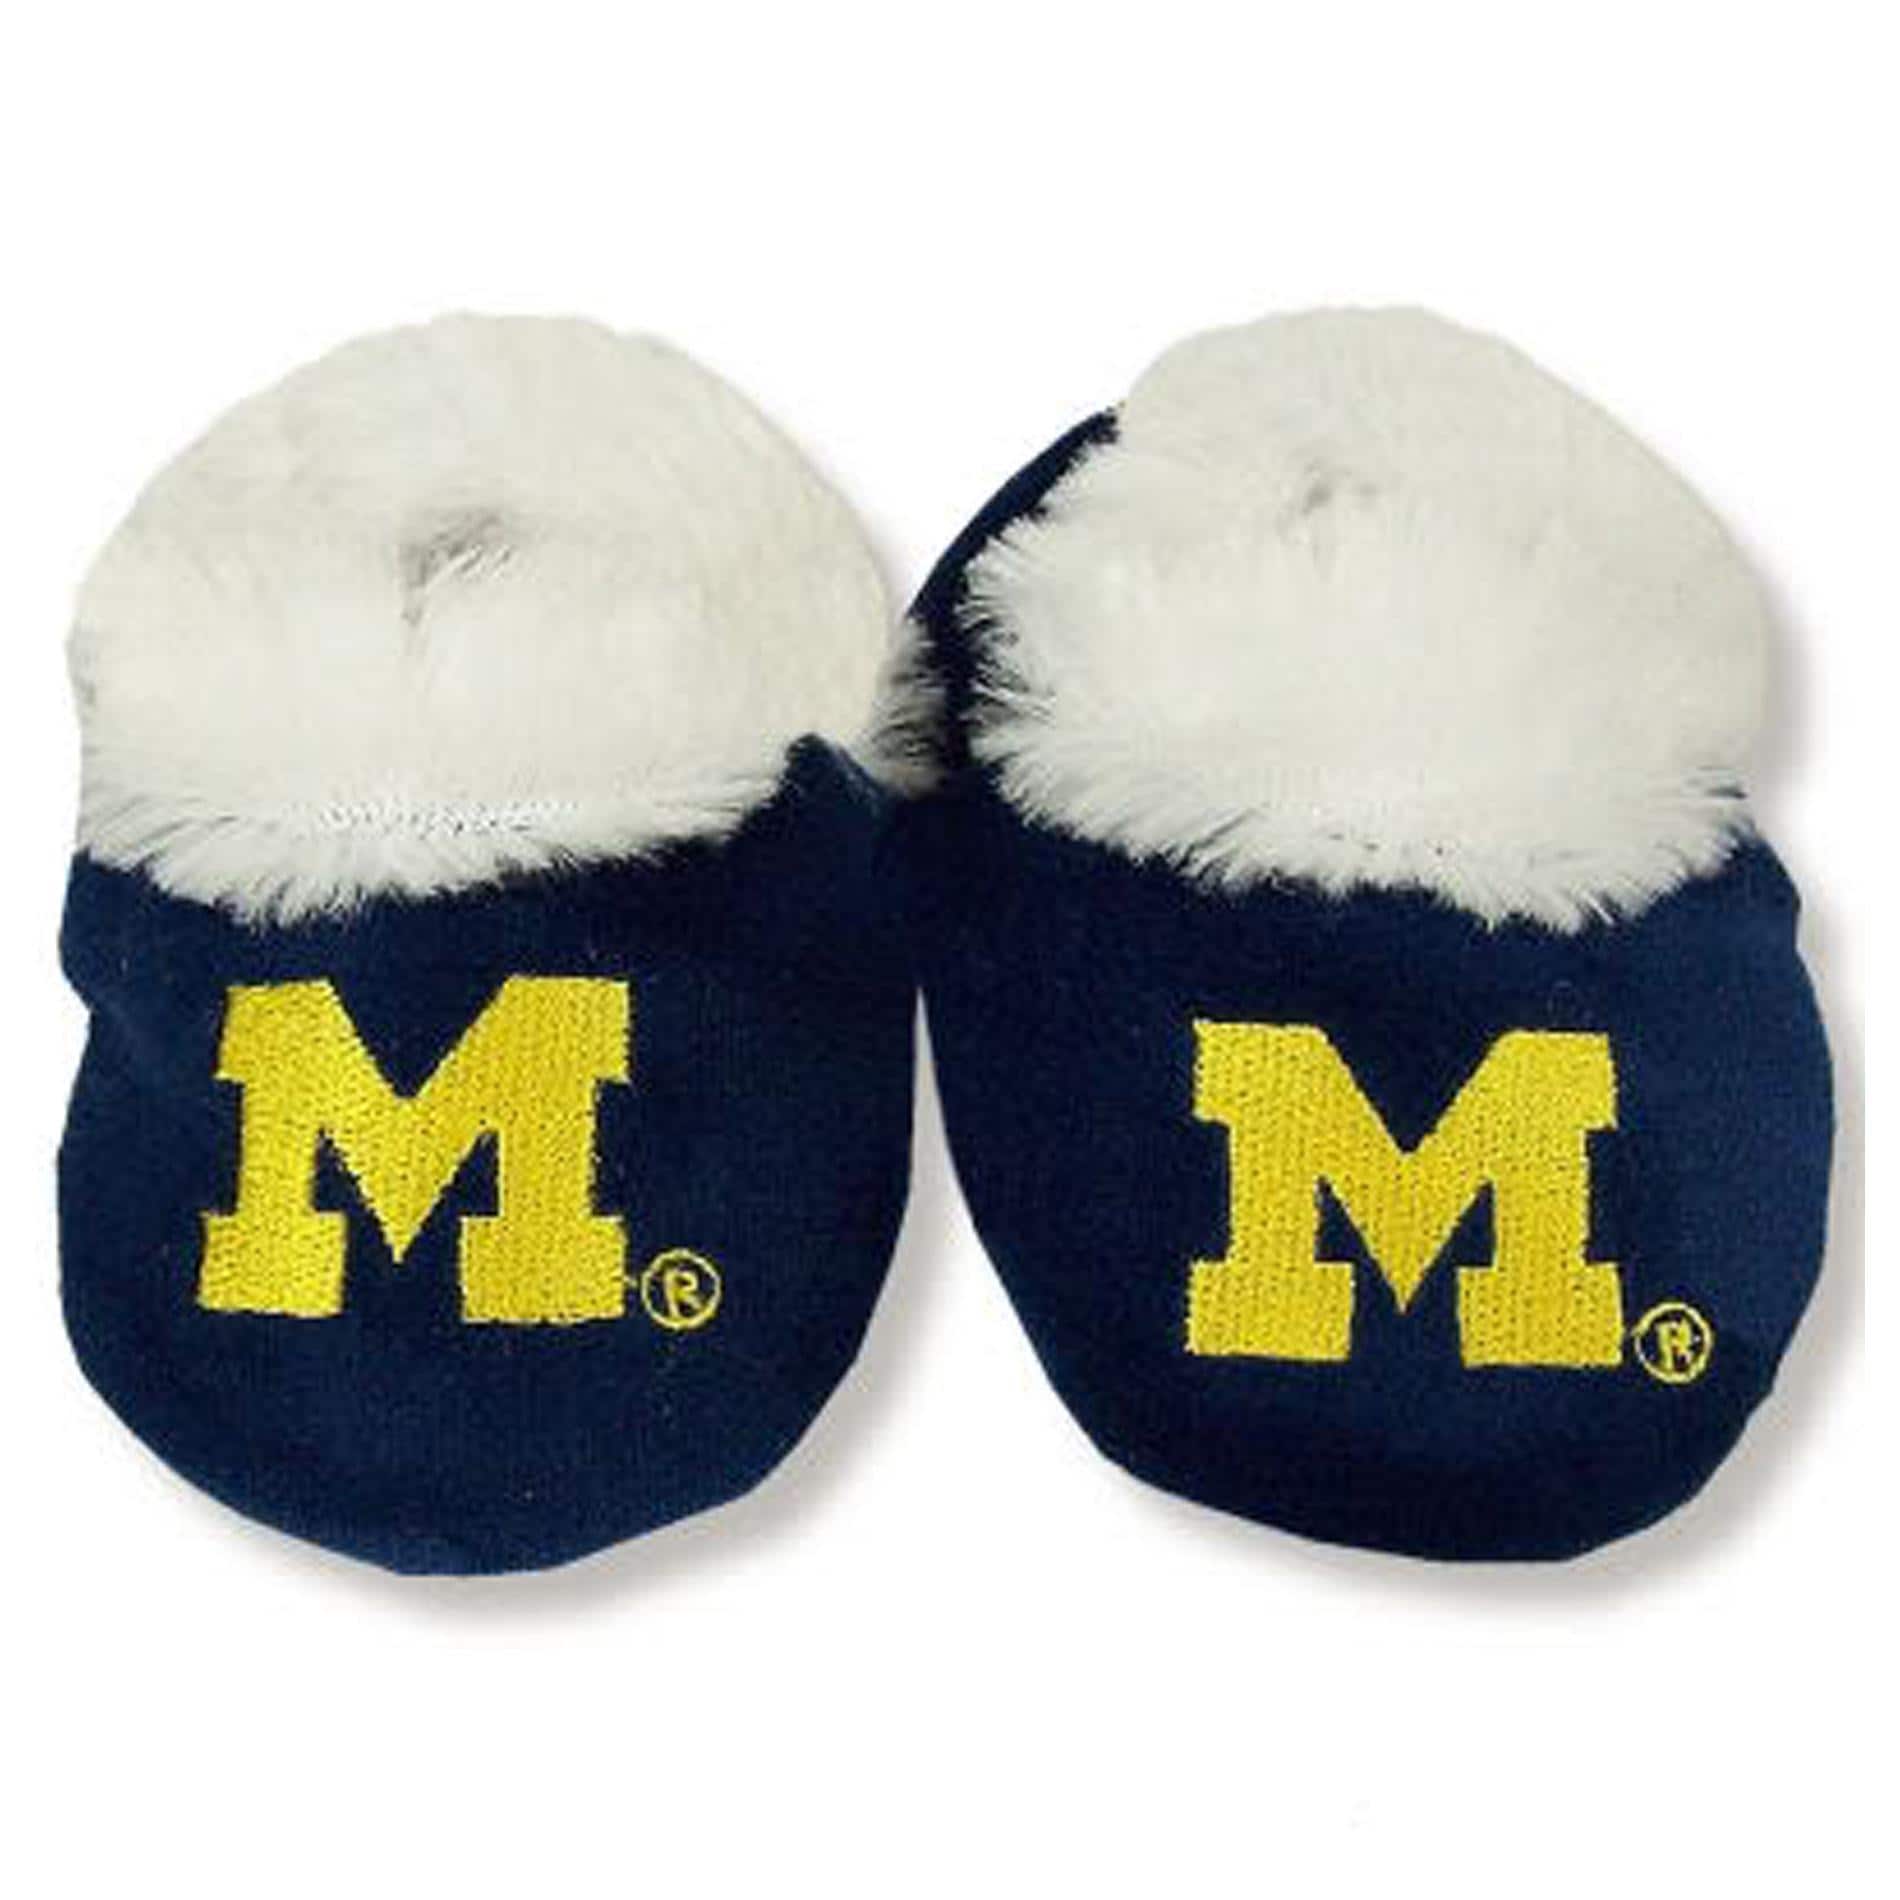 Michigan Wolverines Baby Bootie Slippers  ™ Shopping